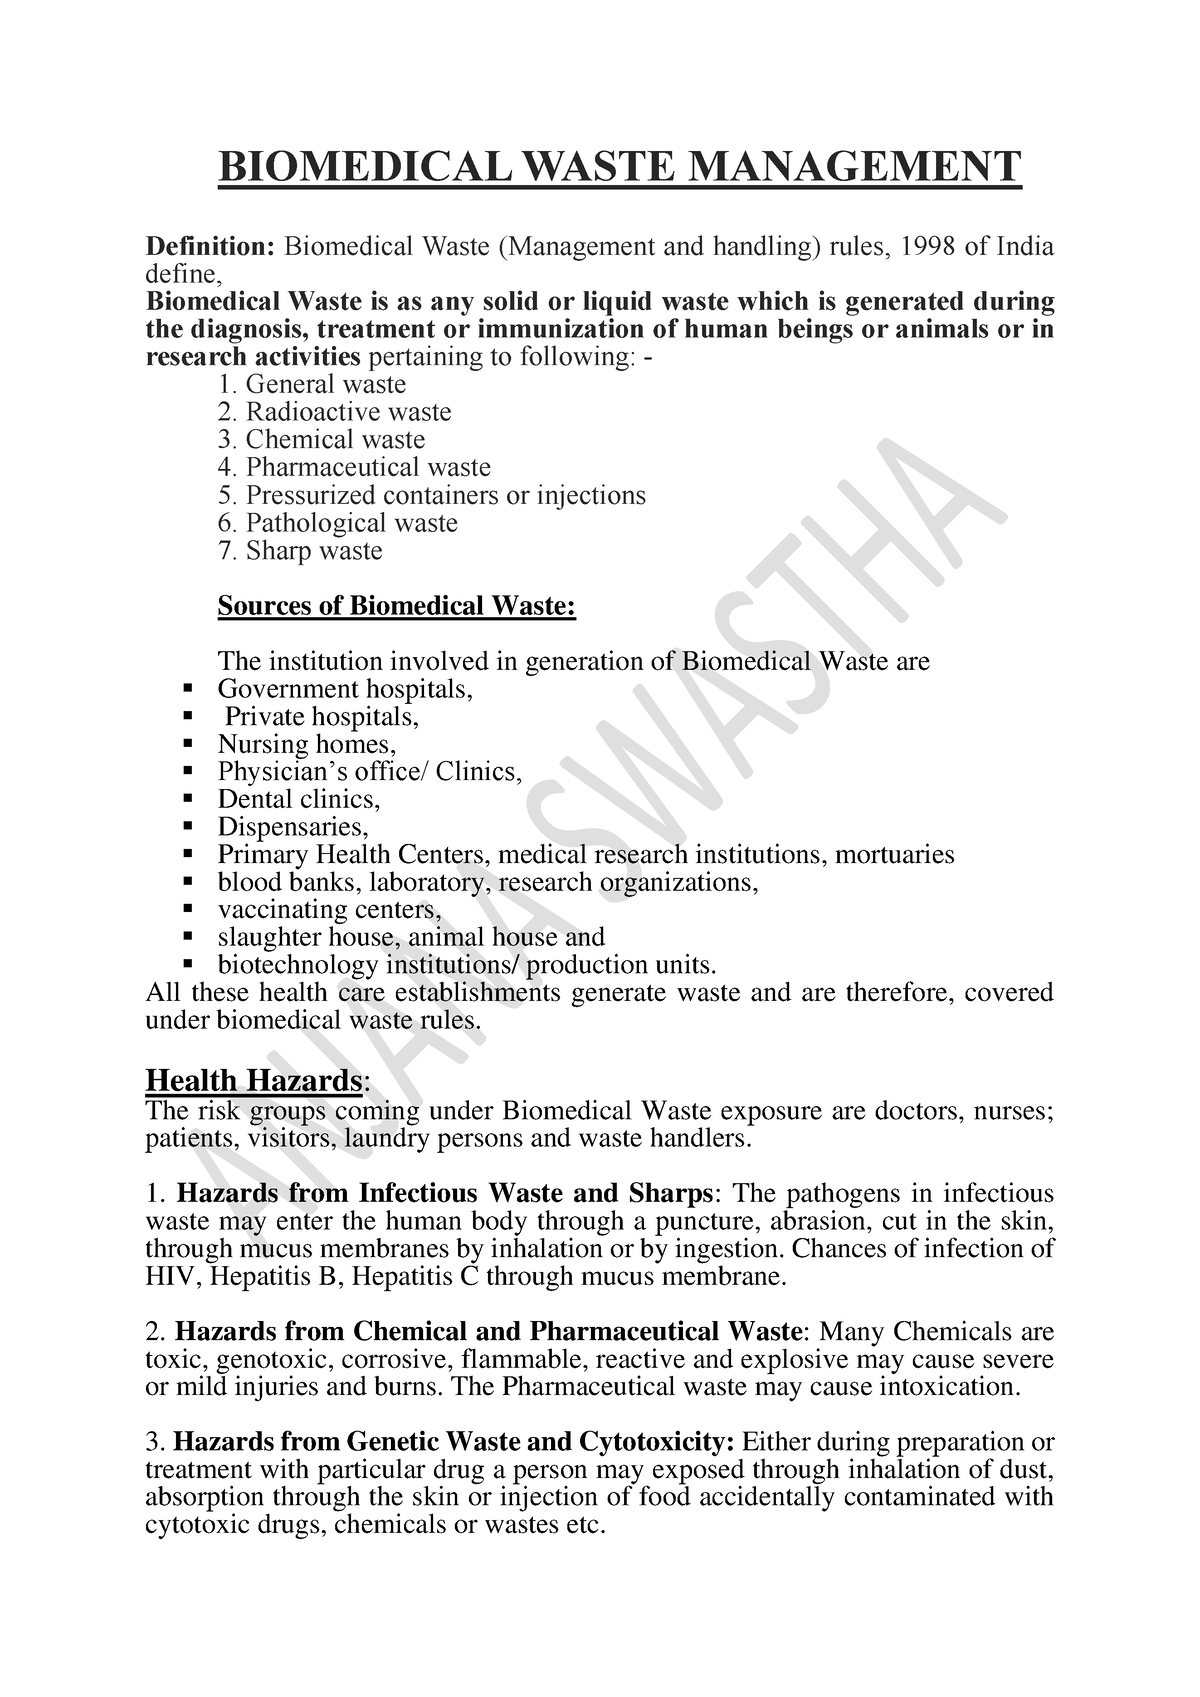 assignment of biomedical waste management